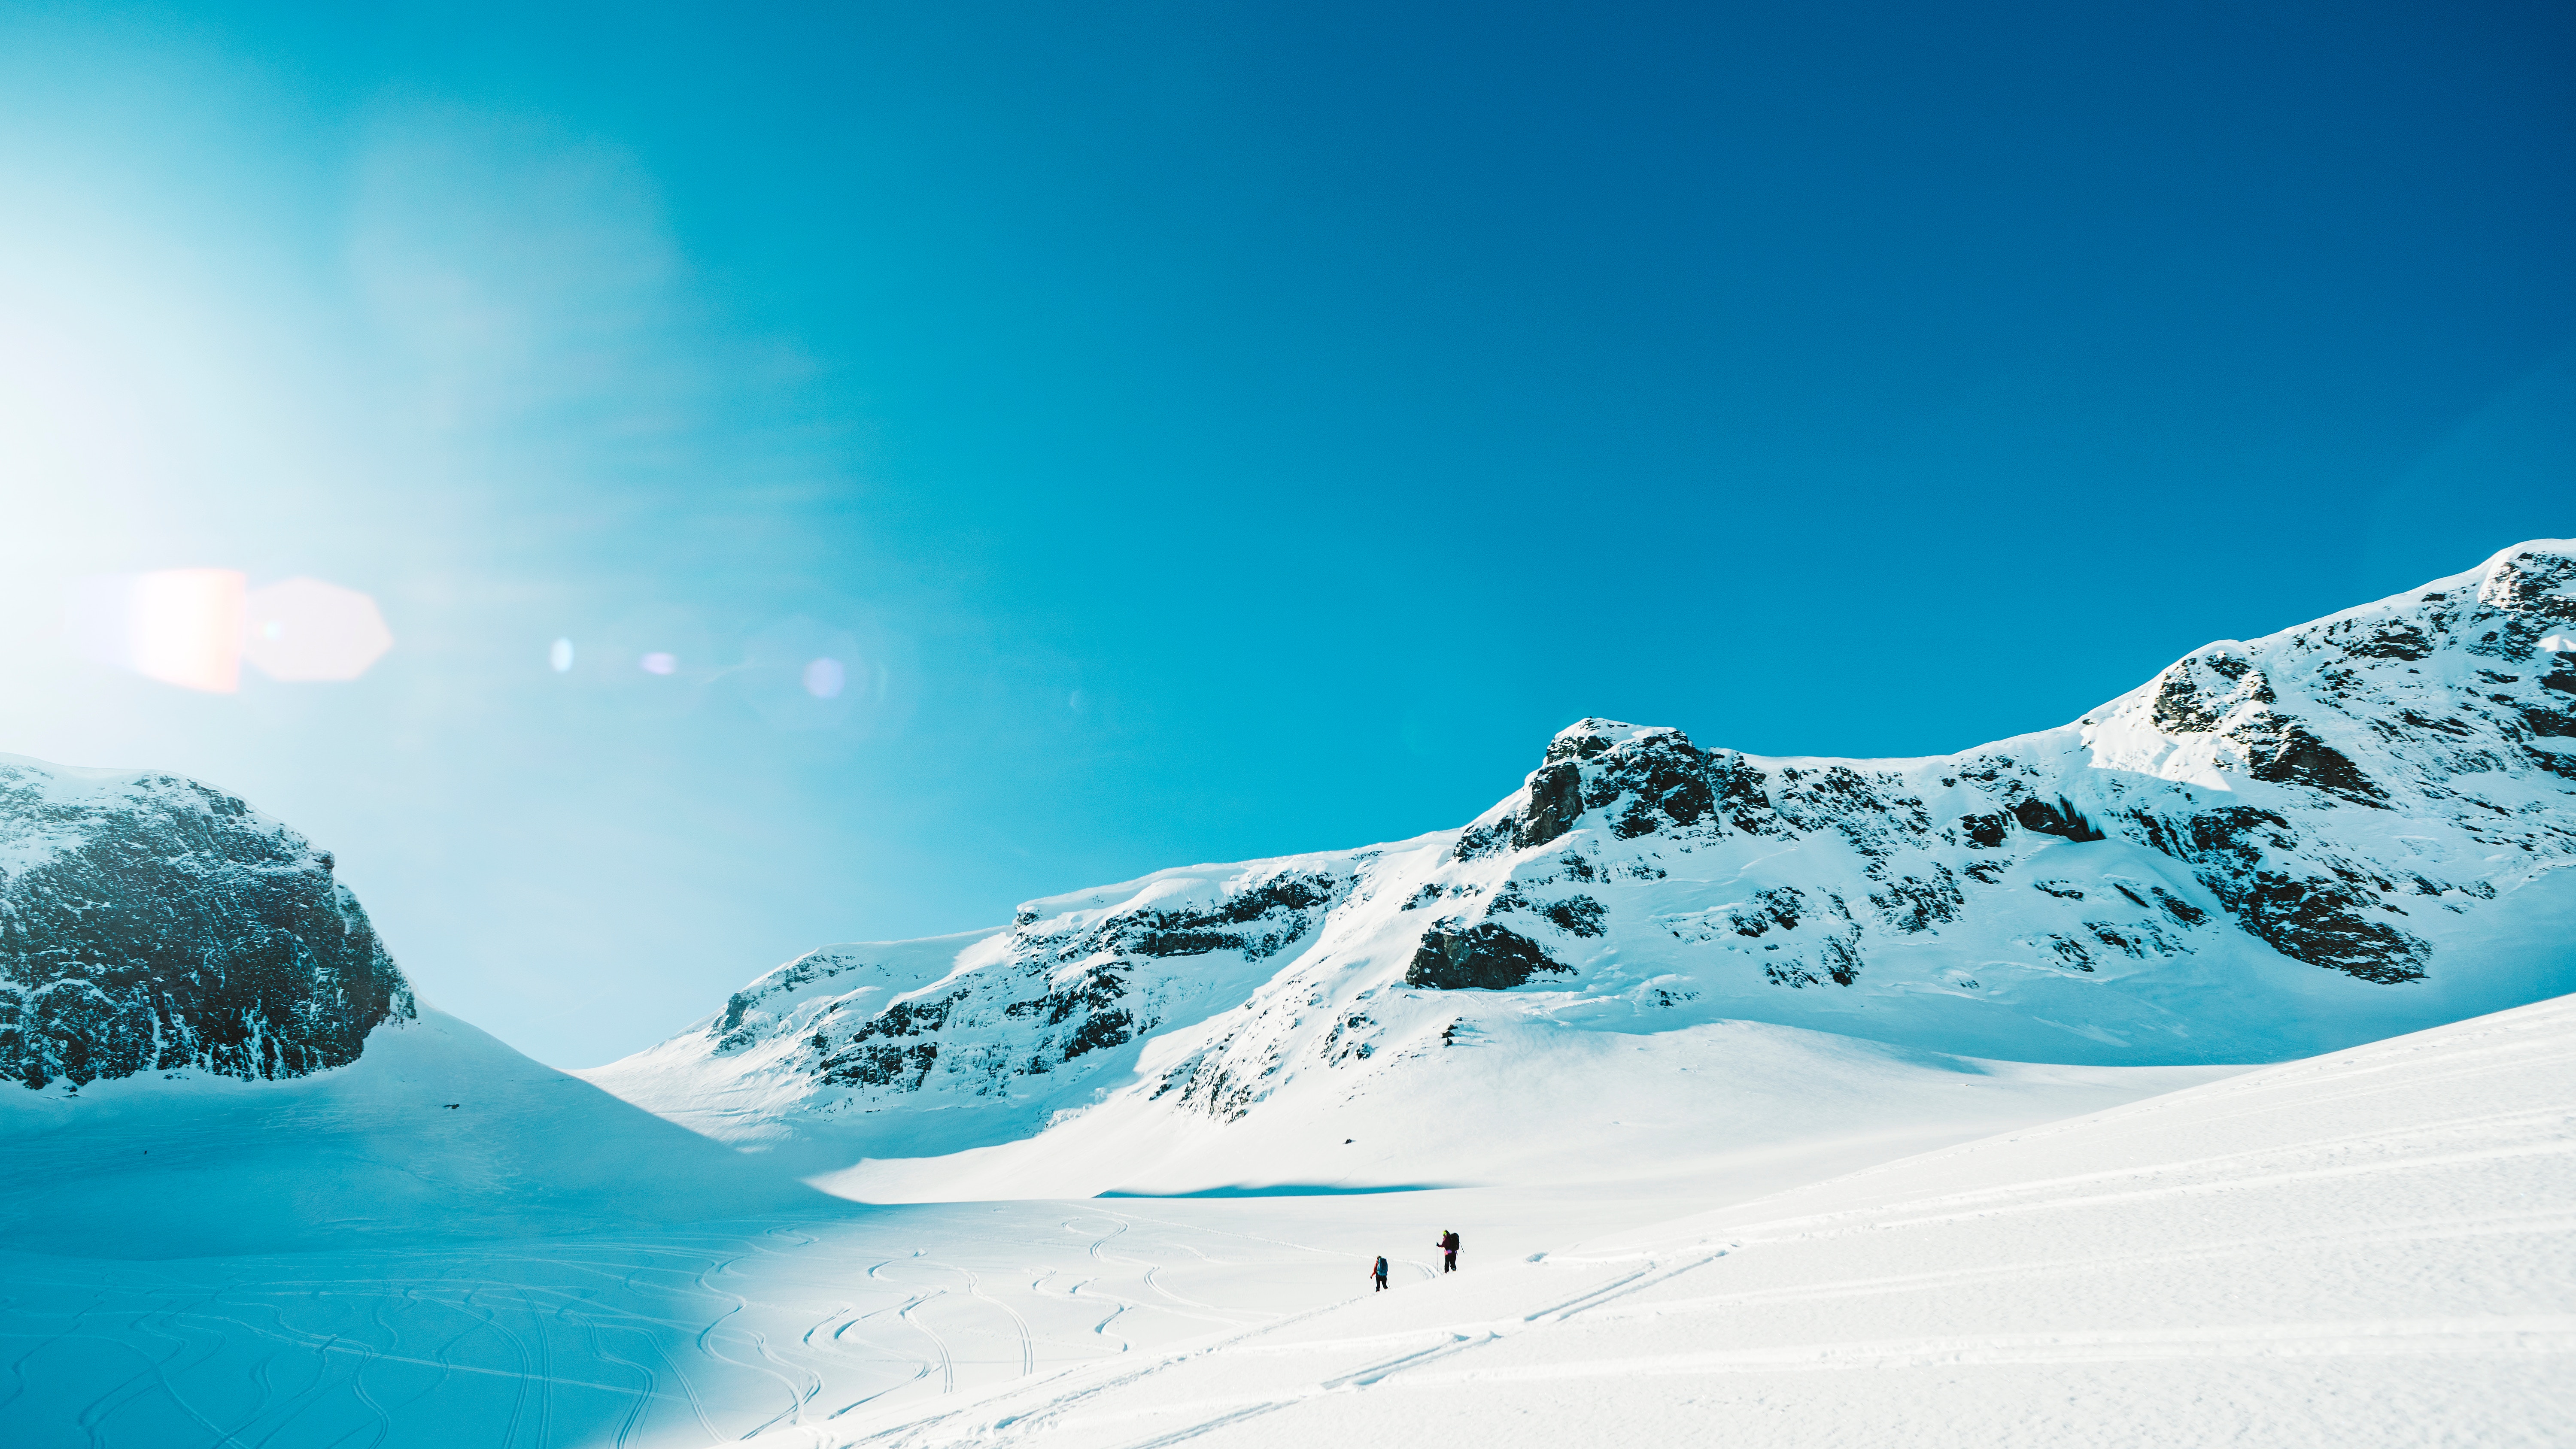 Two people in the distance crossing a snowy mountainous landscape